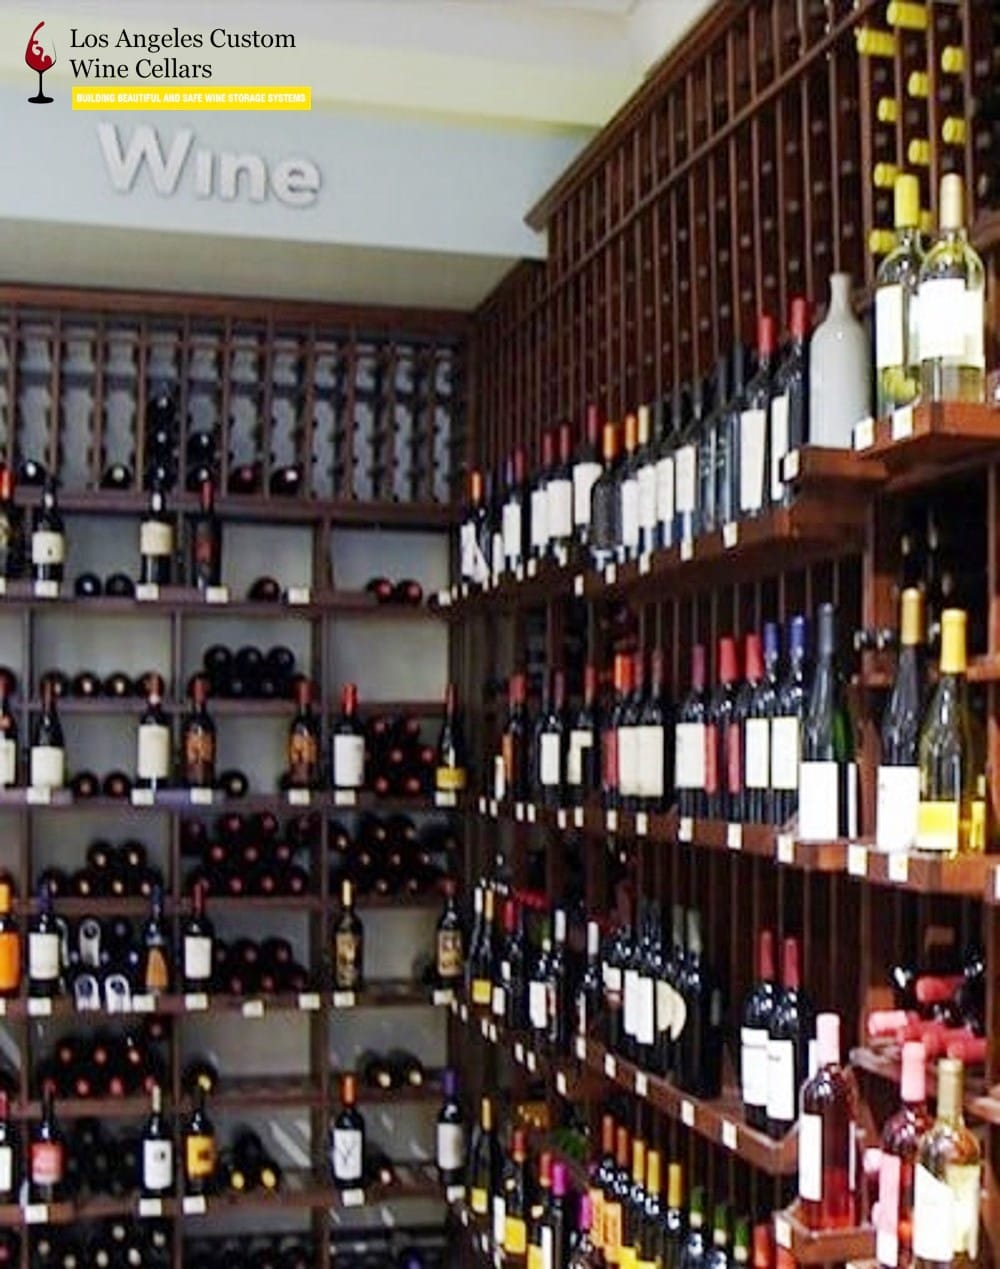 Commercial Wine Cellars and Commercial Wine Racks – What You Need to Know